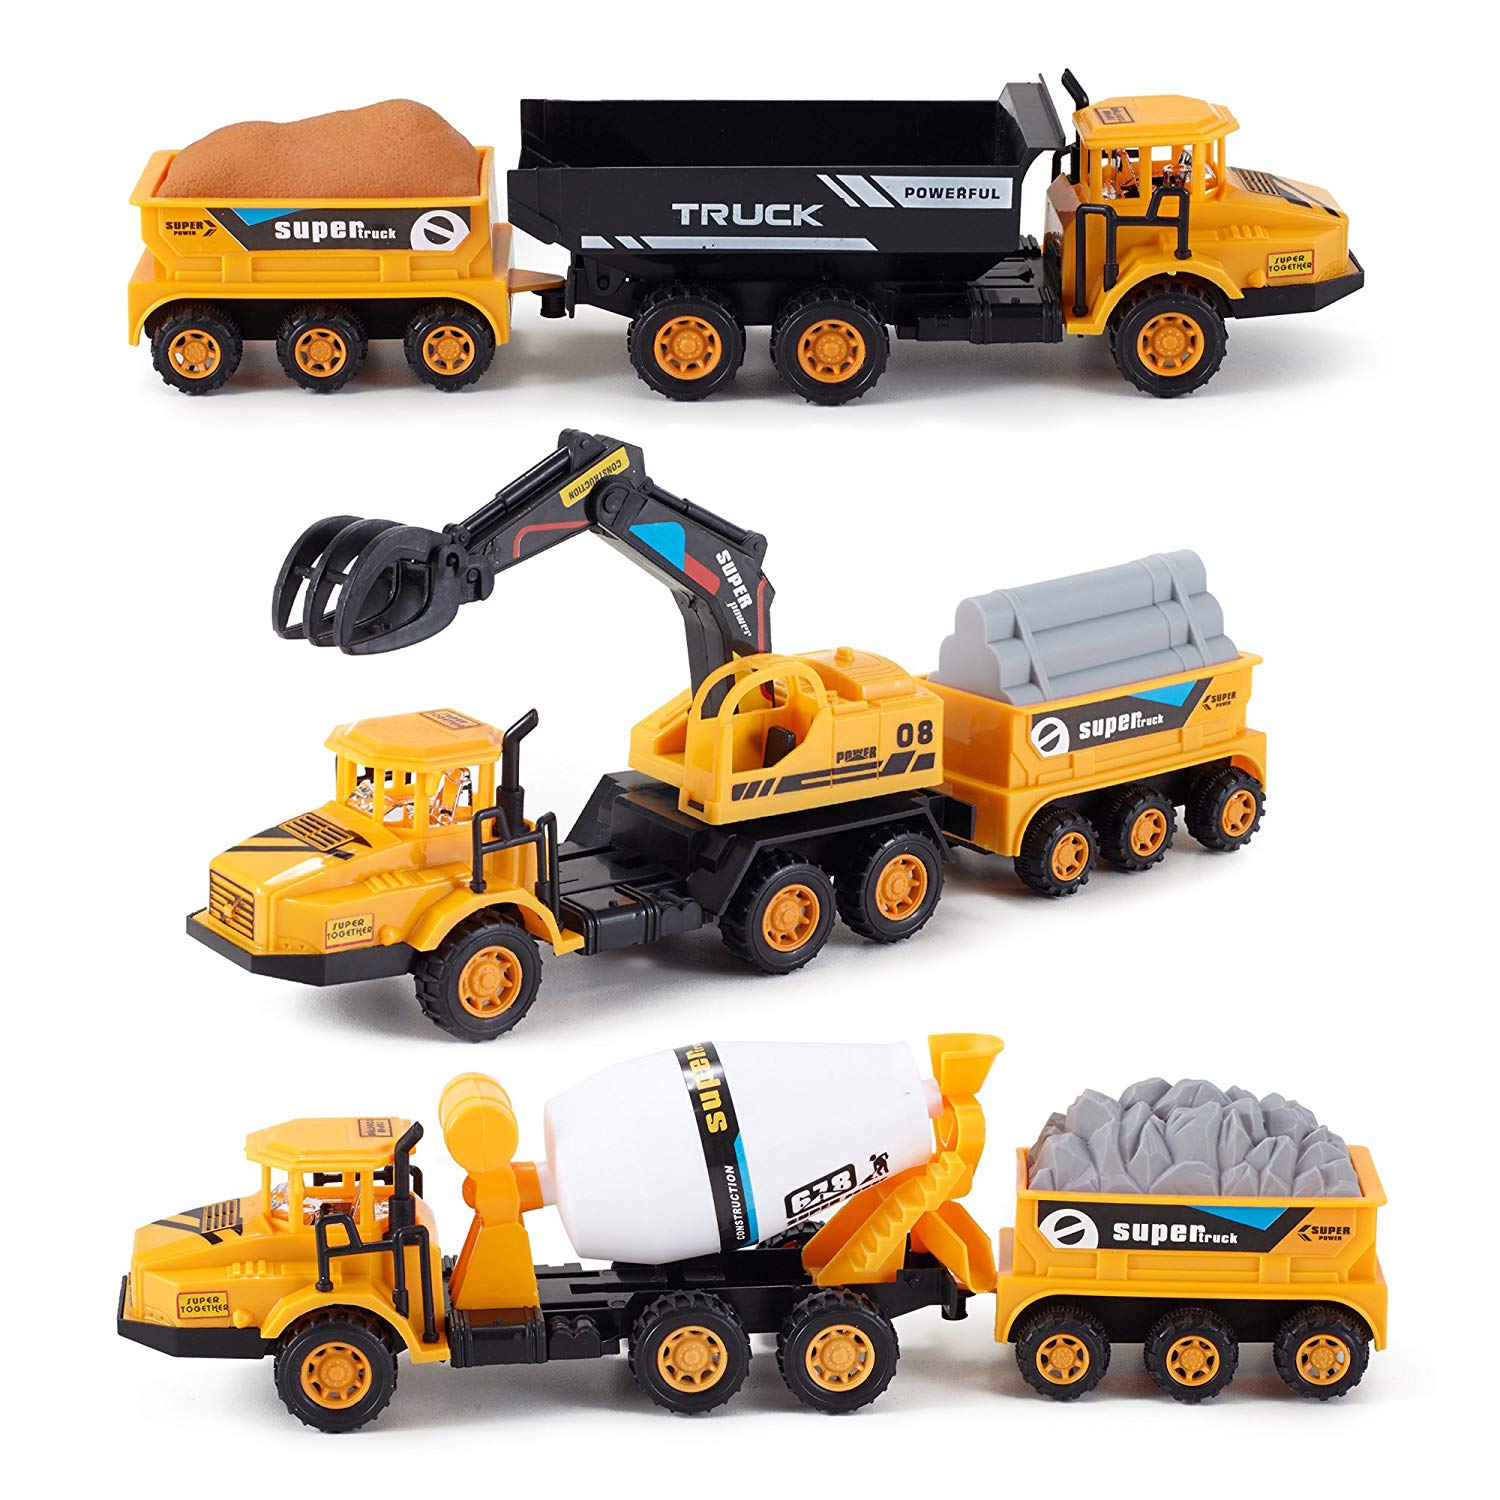 Construction truck toy photo